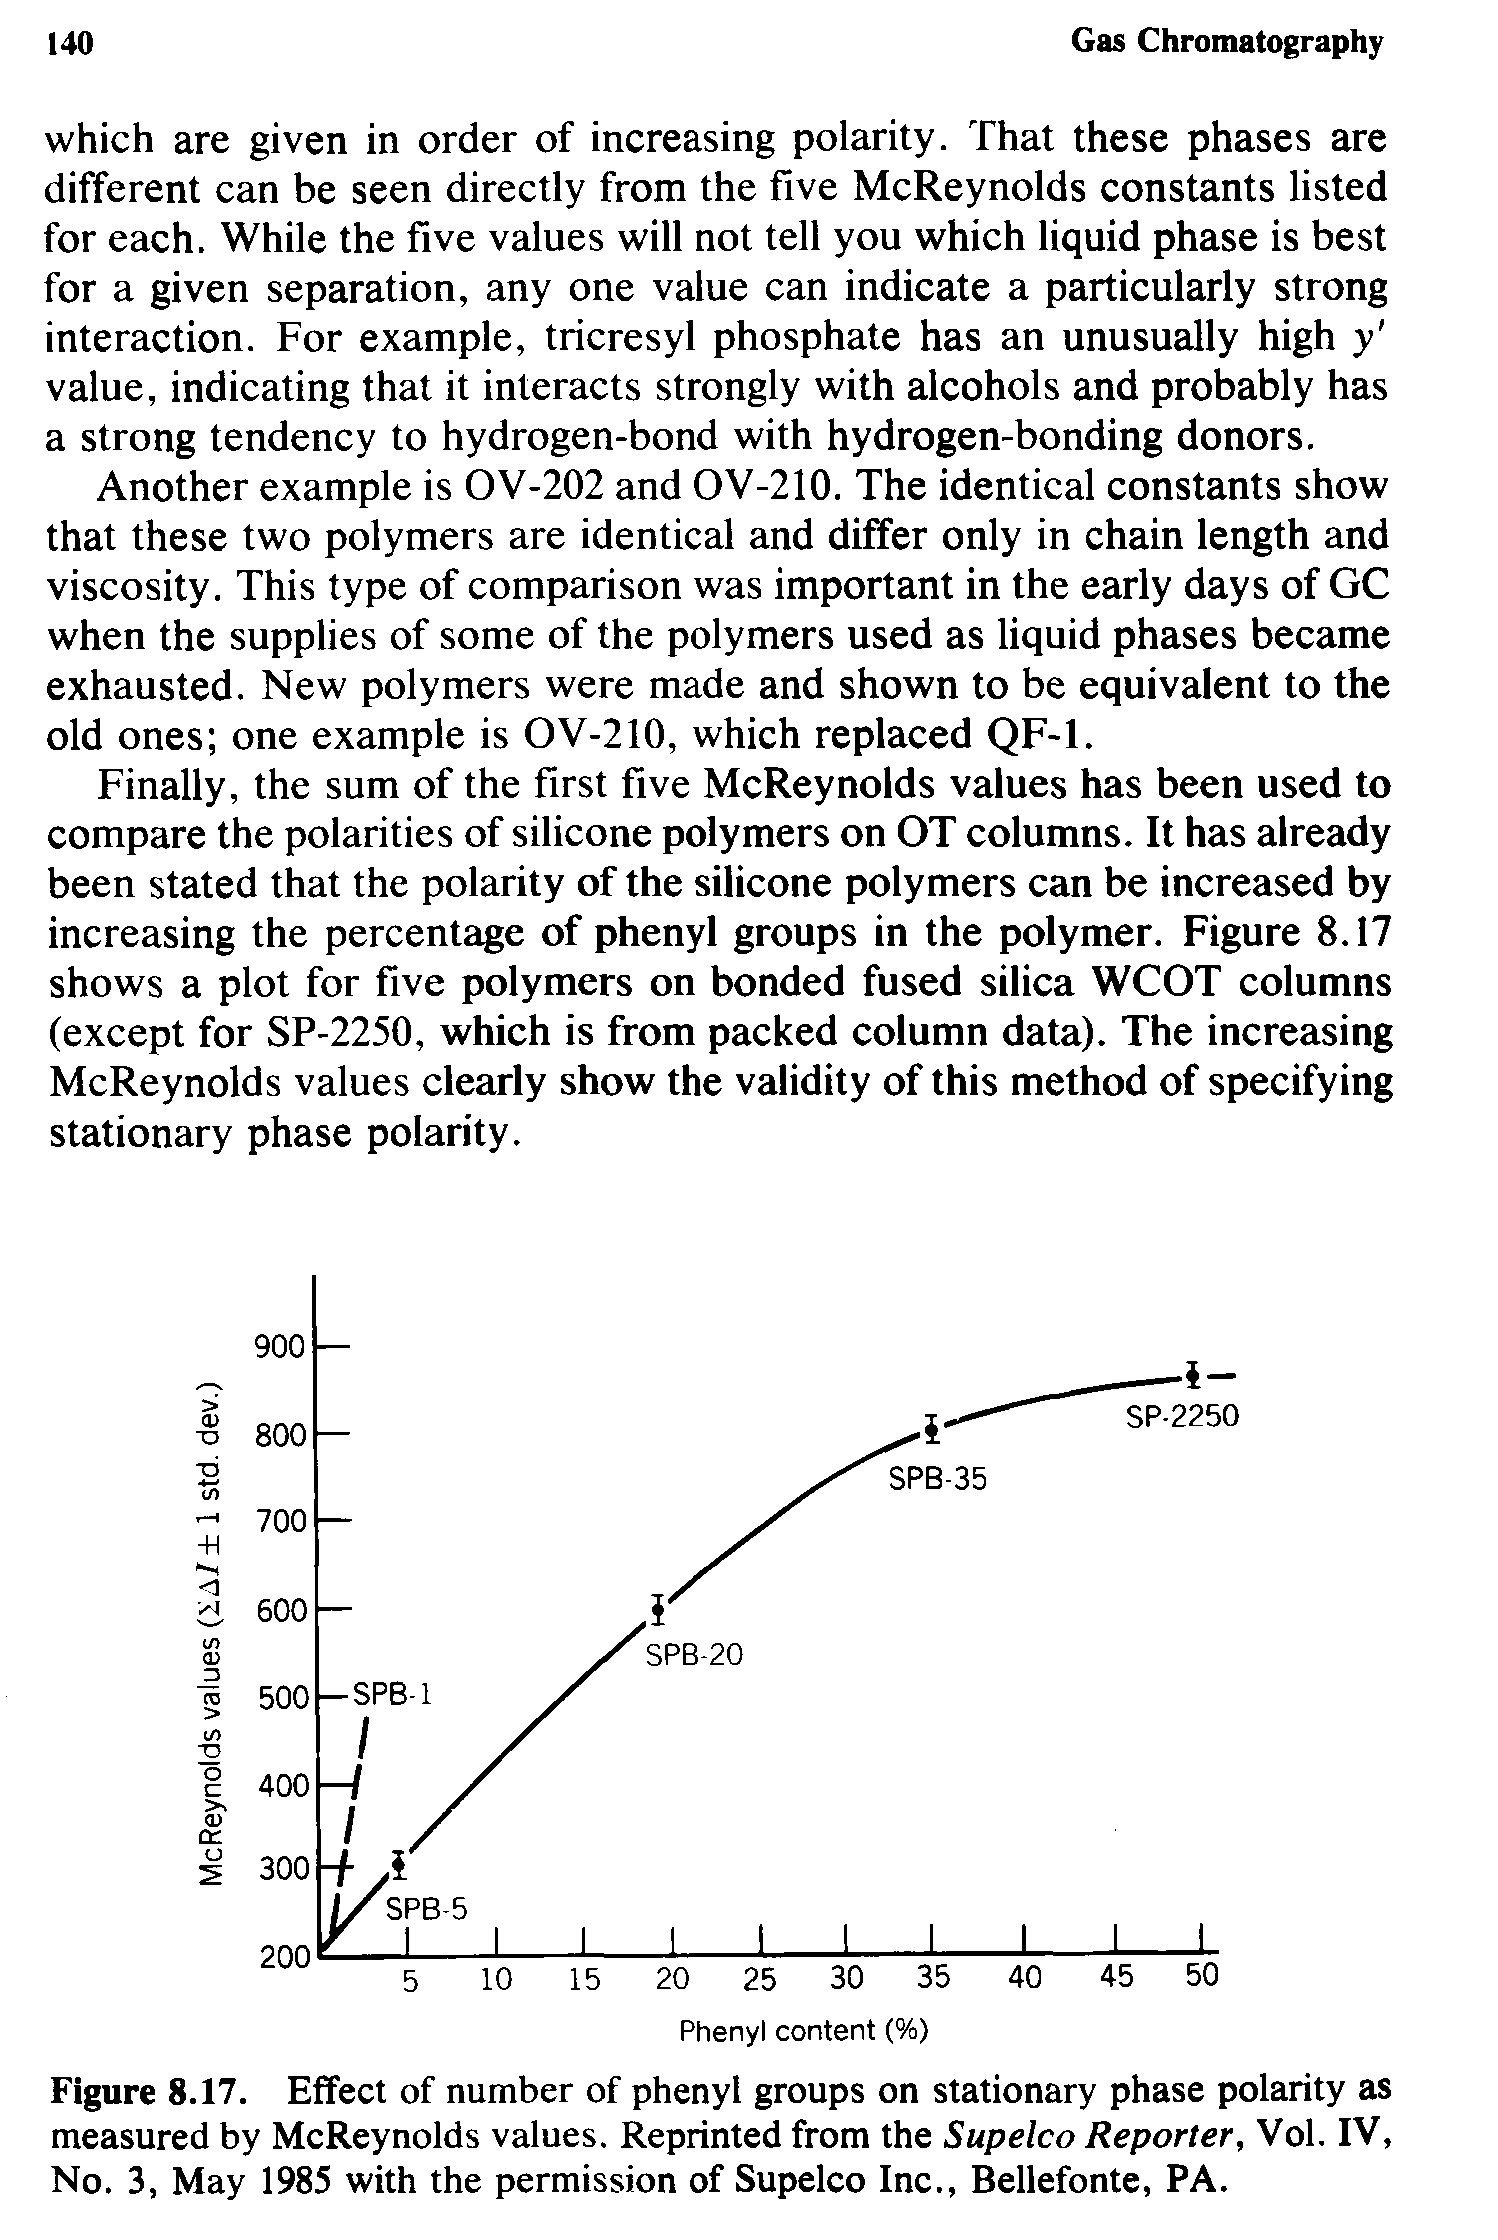 Figure 8.17. Effect of number of phenyl groups on stationary phase polarity as measured by McReynolds values. Reprinted from the Supelco Reporter, Vol. IV, No. 3, May 1985 with the permission of Supelco Inc., Bellefonte, PA.